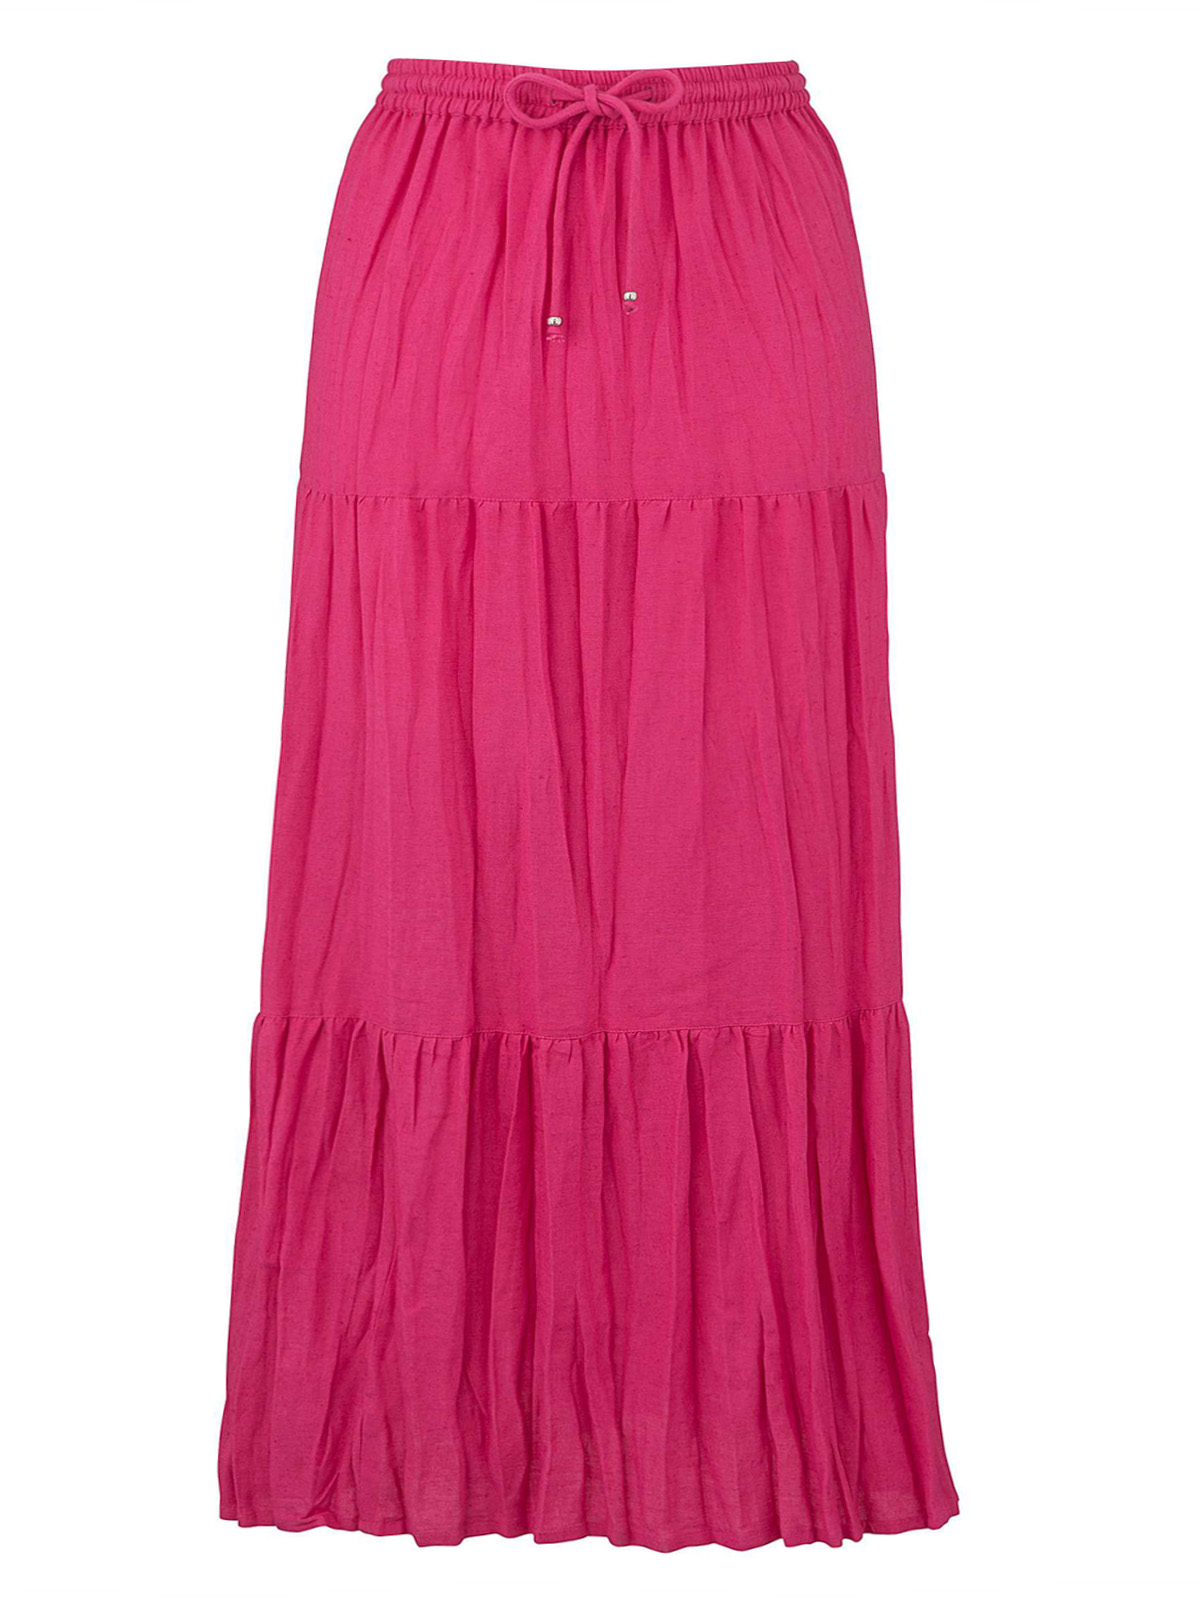 Wholesale Plus Size Boutique Clothing By Anthology Hot Pink Linen Blend Tiered Skirt Plus